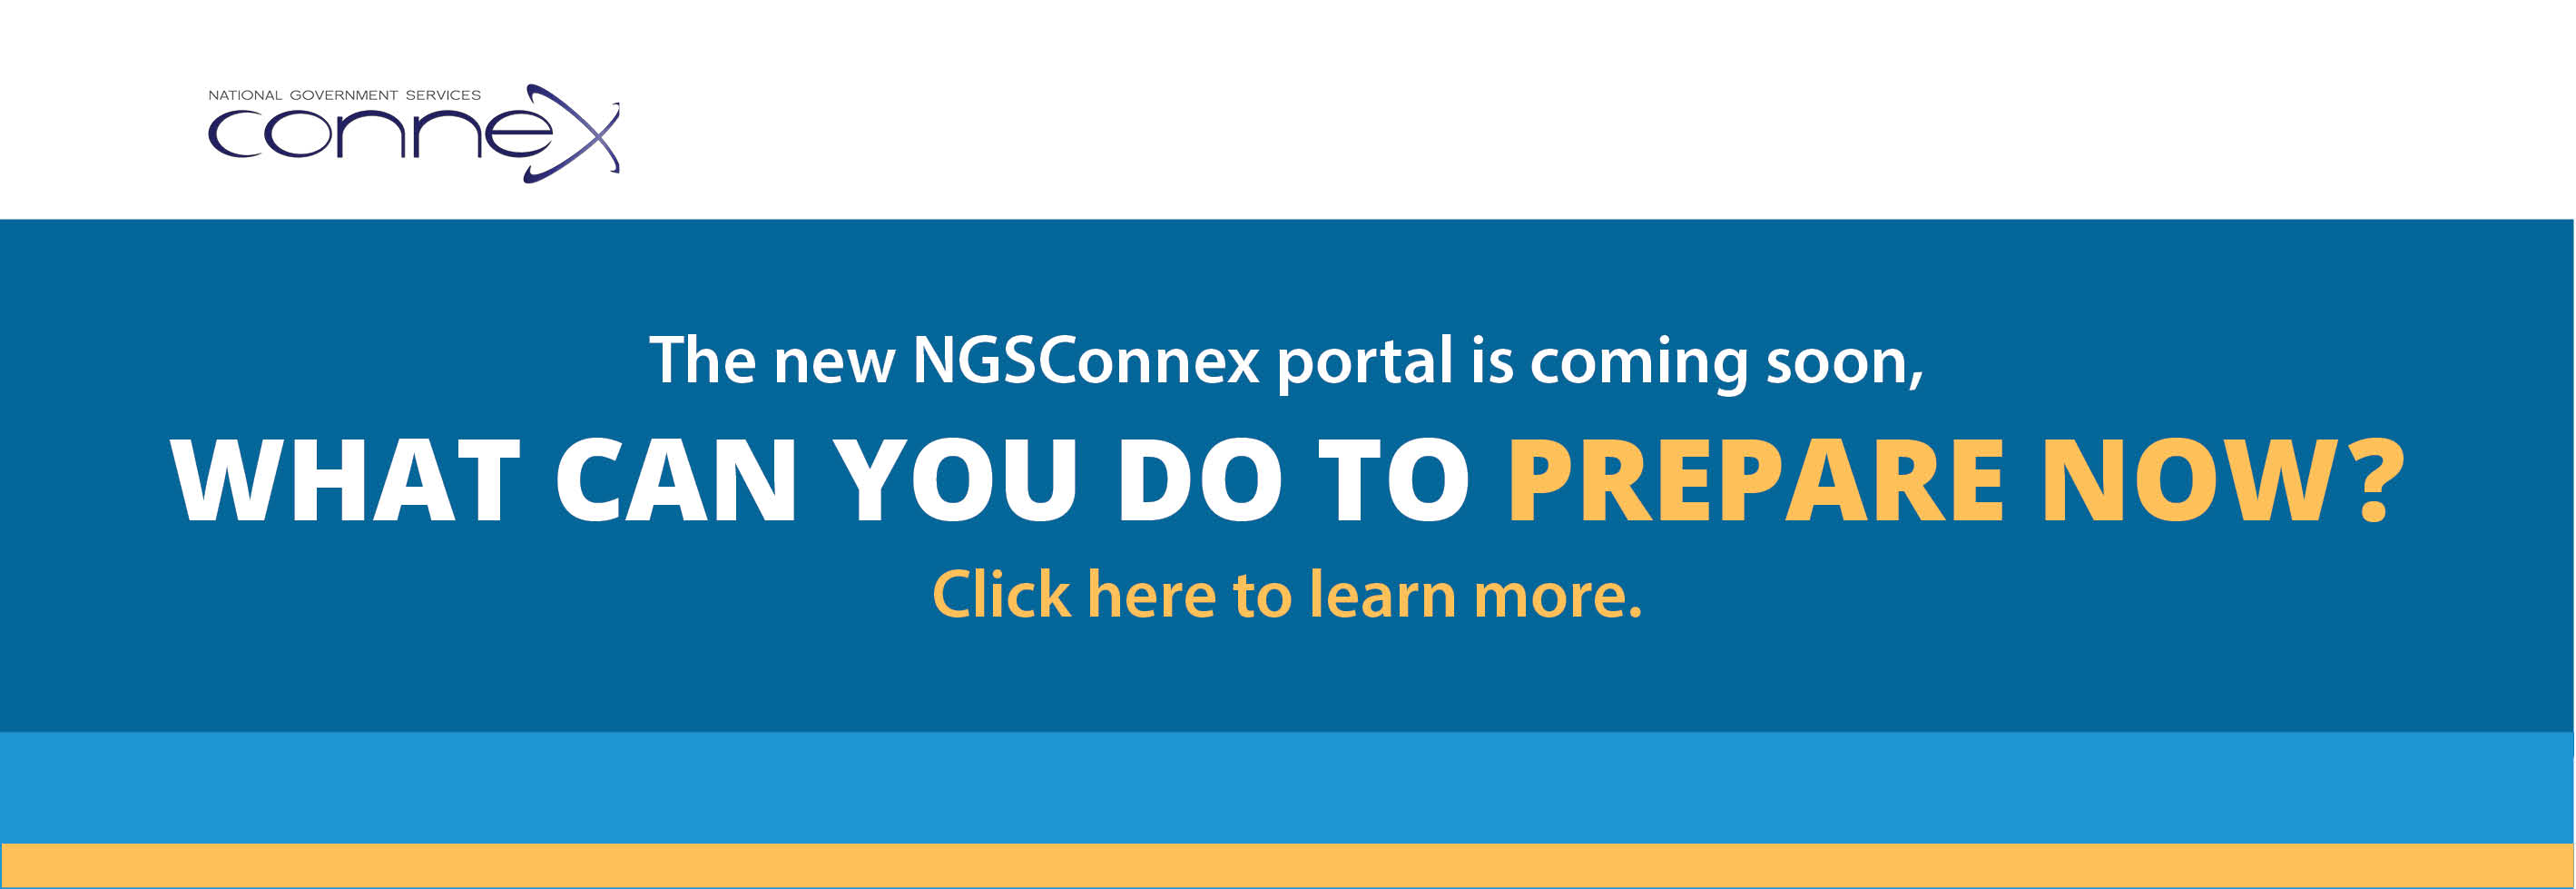 The new NGSConnex portal is coming soon, What Can You Do To Prepare Now? Click here to learn more.